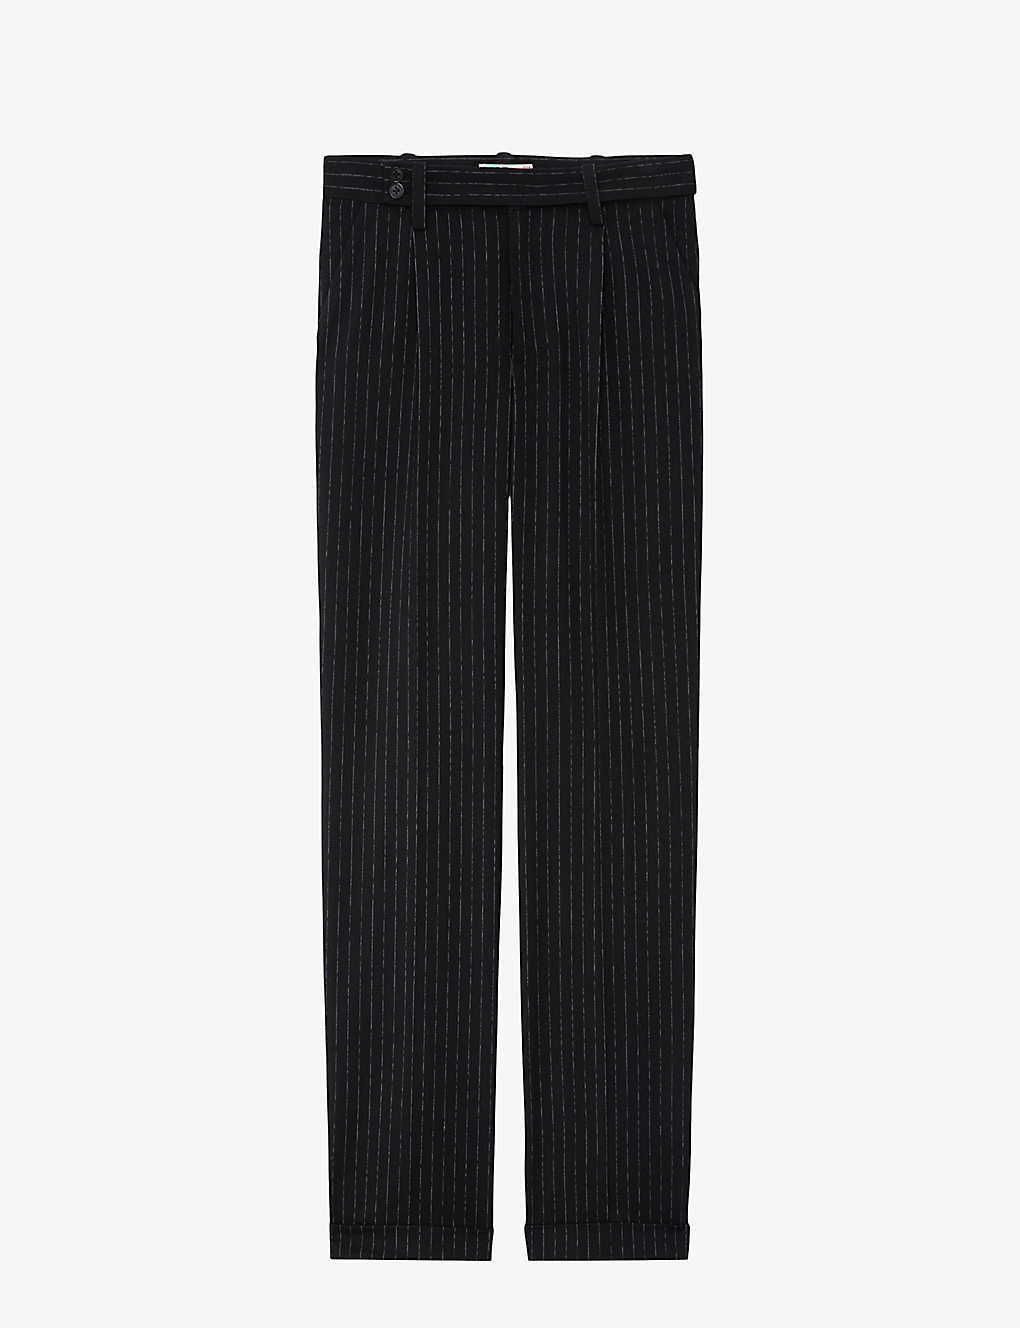 Zadig & Voltaire Zadig&voltaire Women's Noir Pura High-rise Pinstripe Stretch-woven Trousers